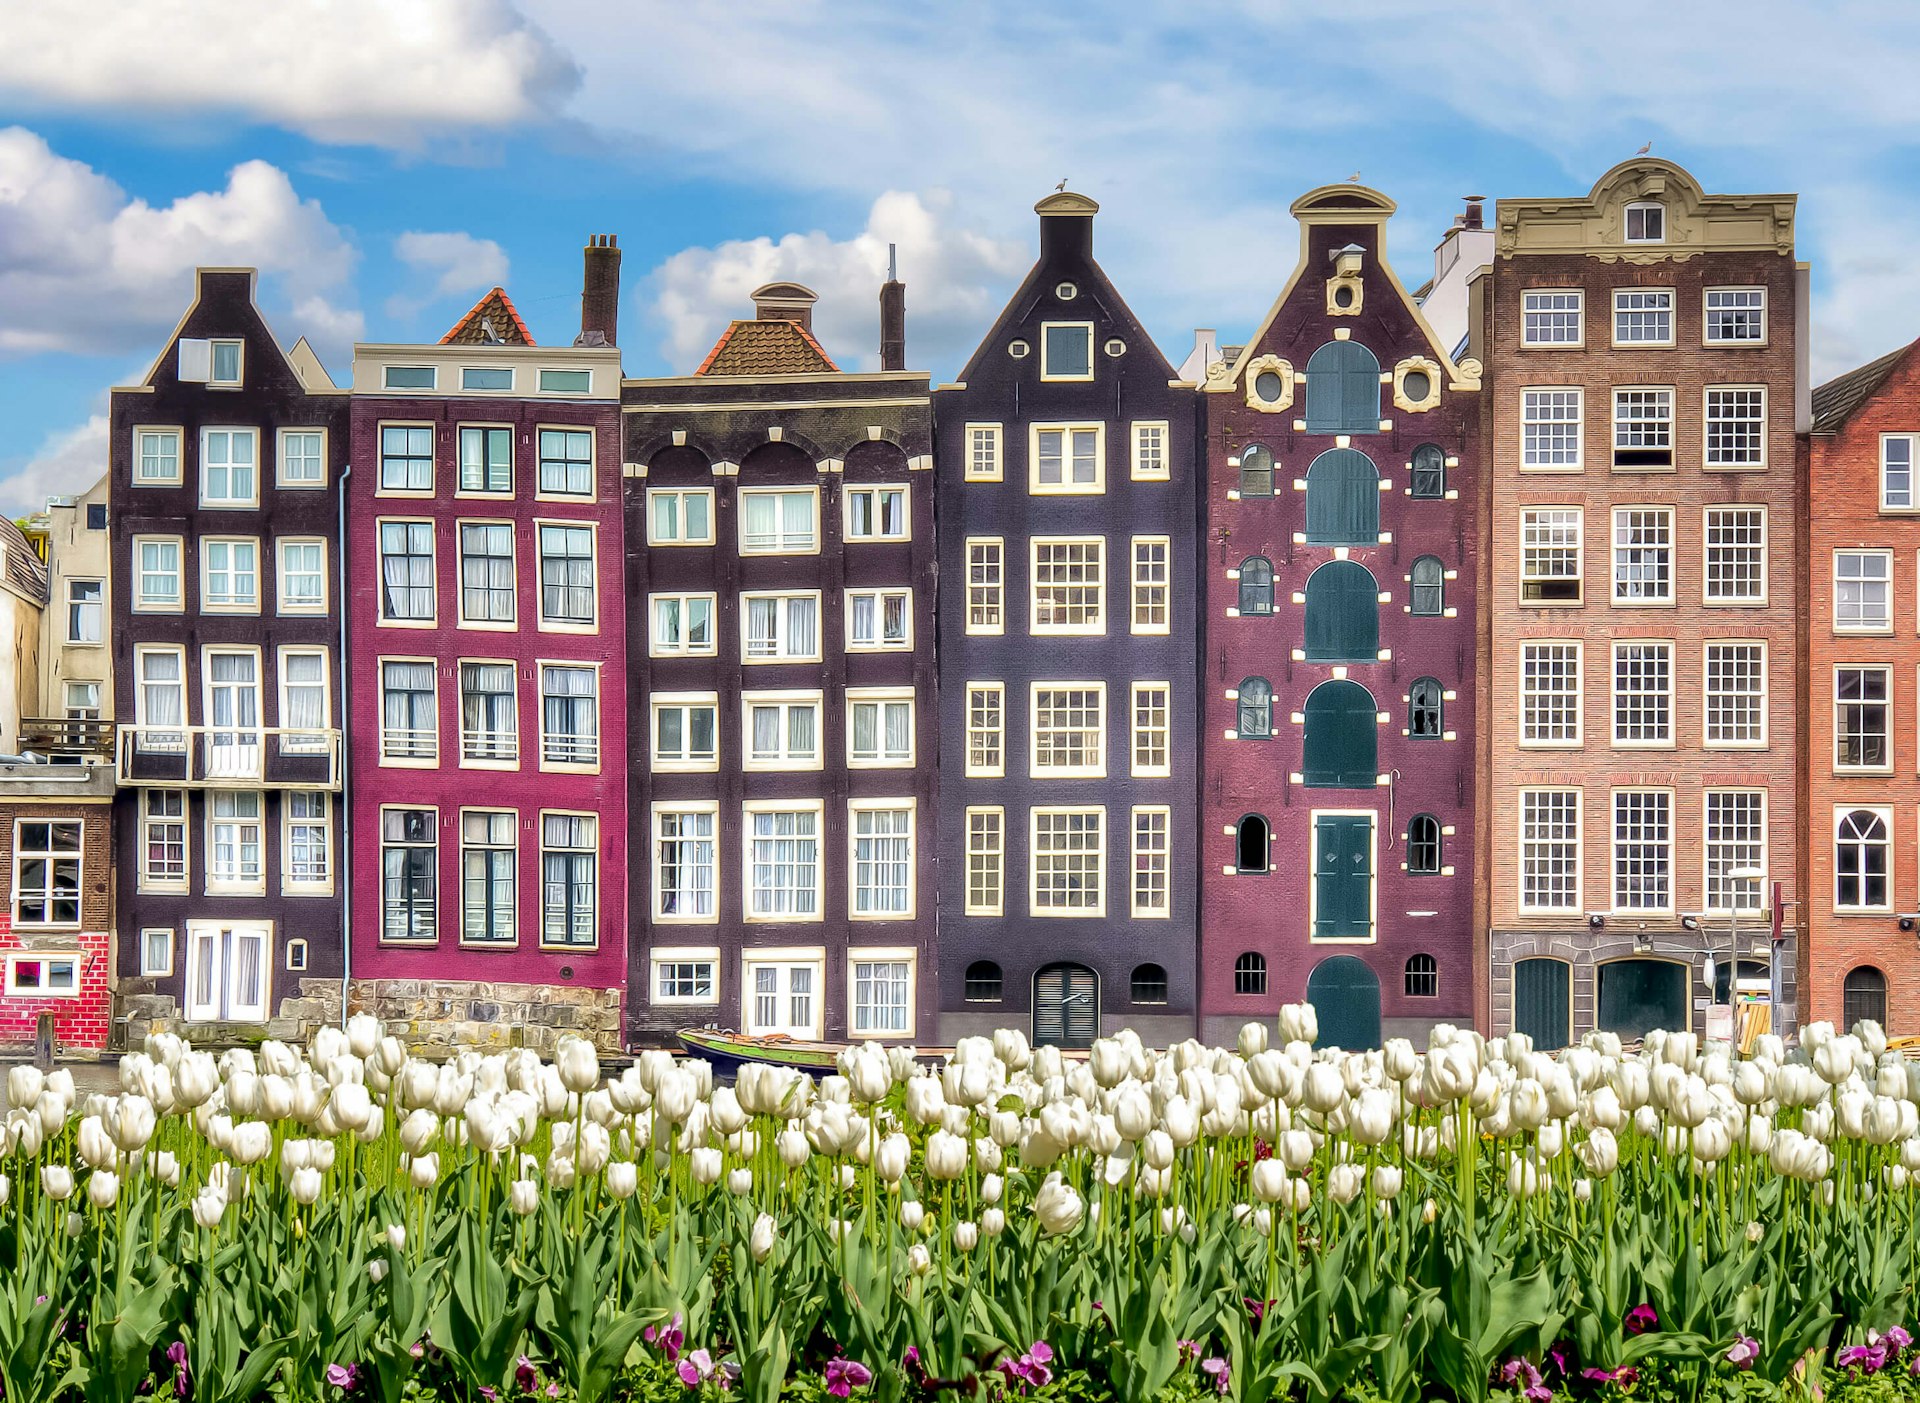 Amsterdam buildings rising above tulip beds